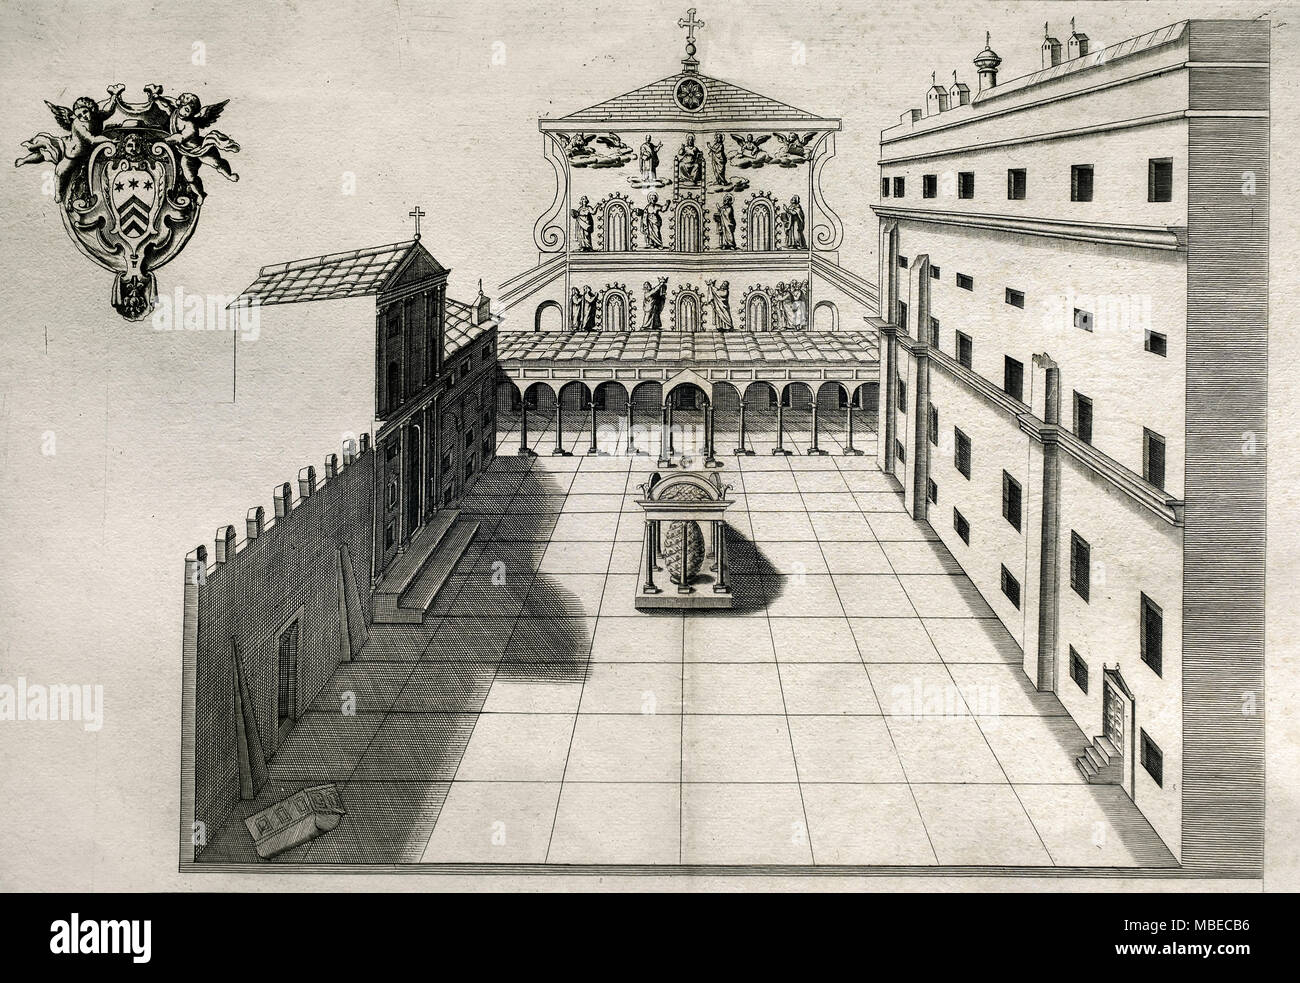 Architecture Of St. Peter's Basilica In Vatican 1810 ( Drawing ) Italy Italian ( The Papal Basilica of St. Peter in the Vatican, or simply St. Peter's Basilica, is an Italian Renaissance church in Vatican City, the papal enclave within the city of Rome. ) Stock Photo